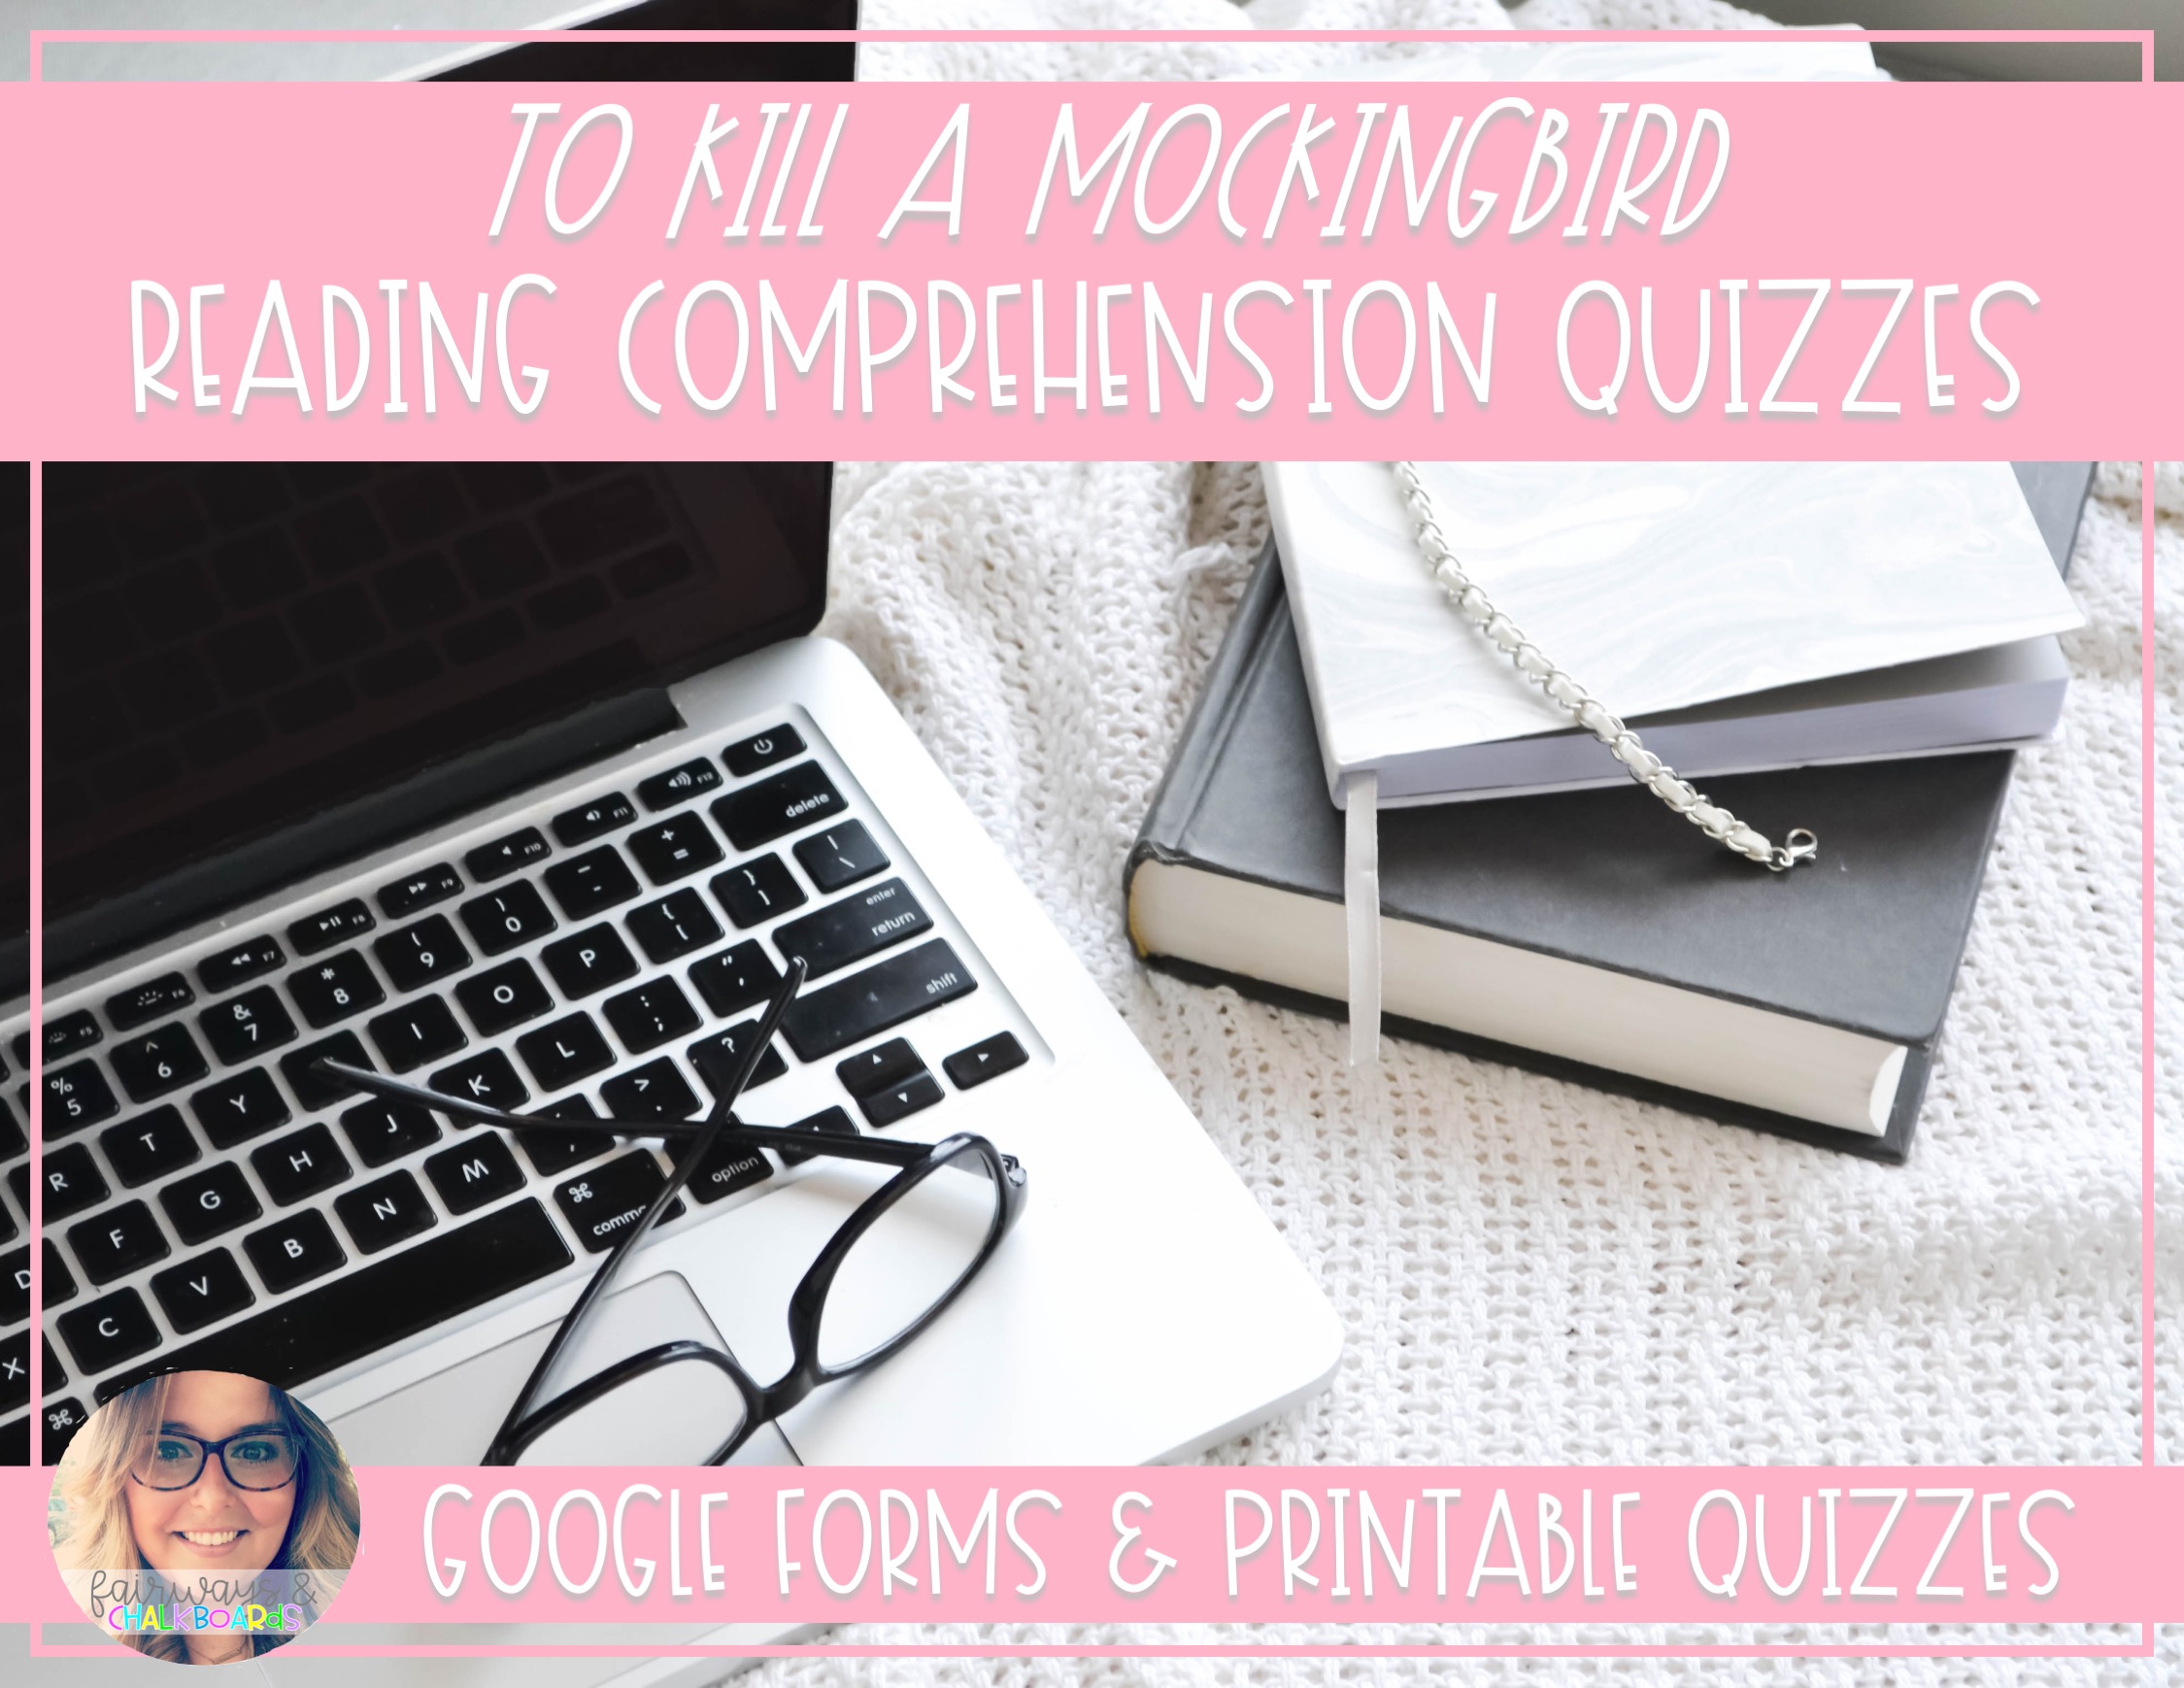 To Kill a Mockingbird Reading Comprehension Quizzes | Digital and Printable's featured image